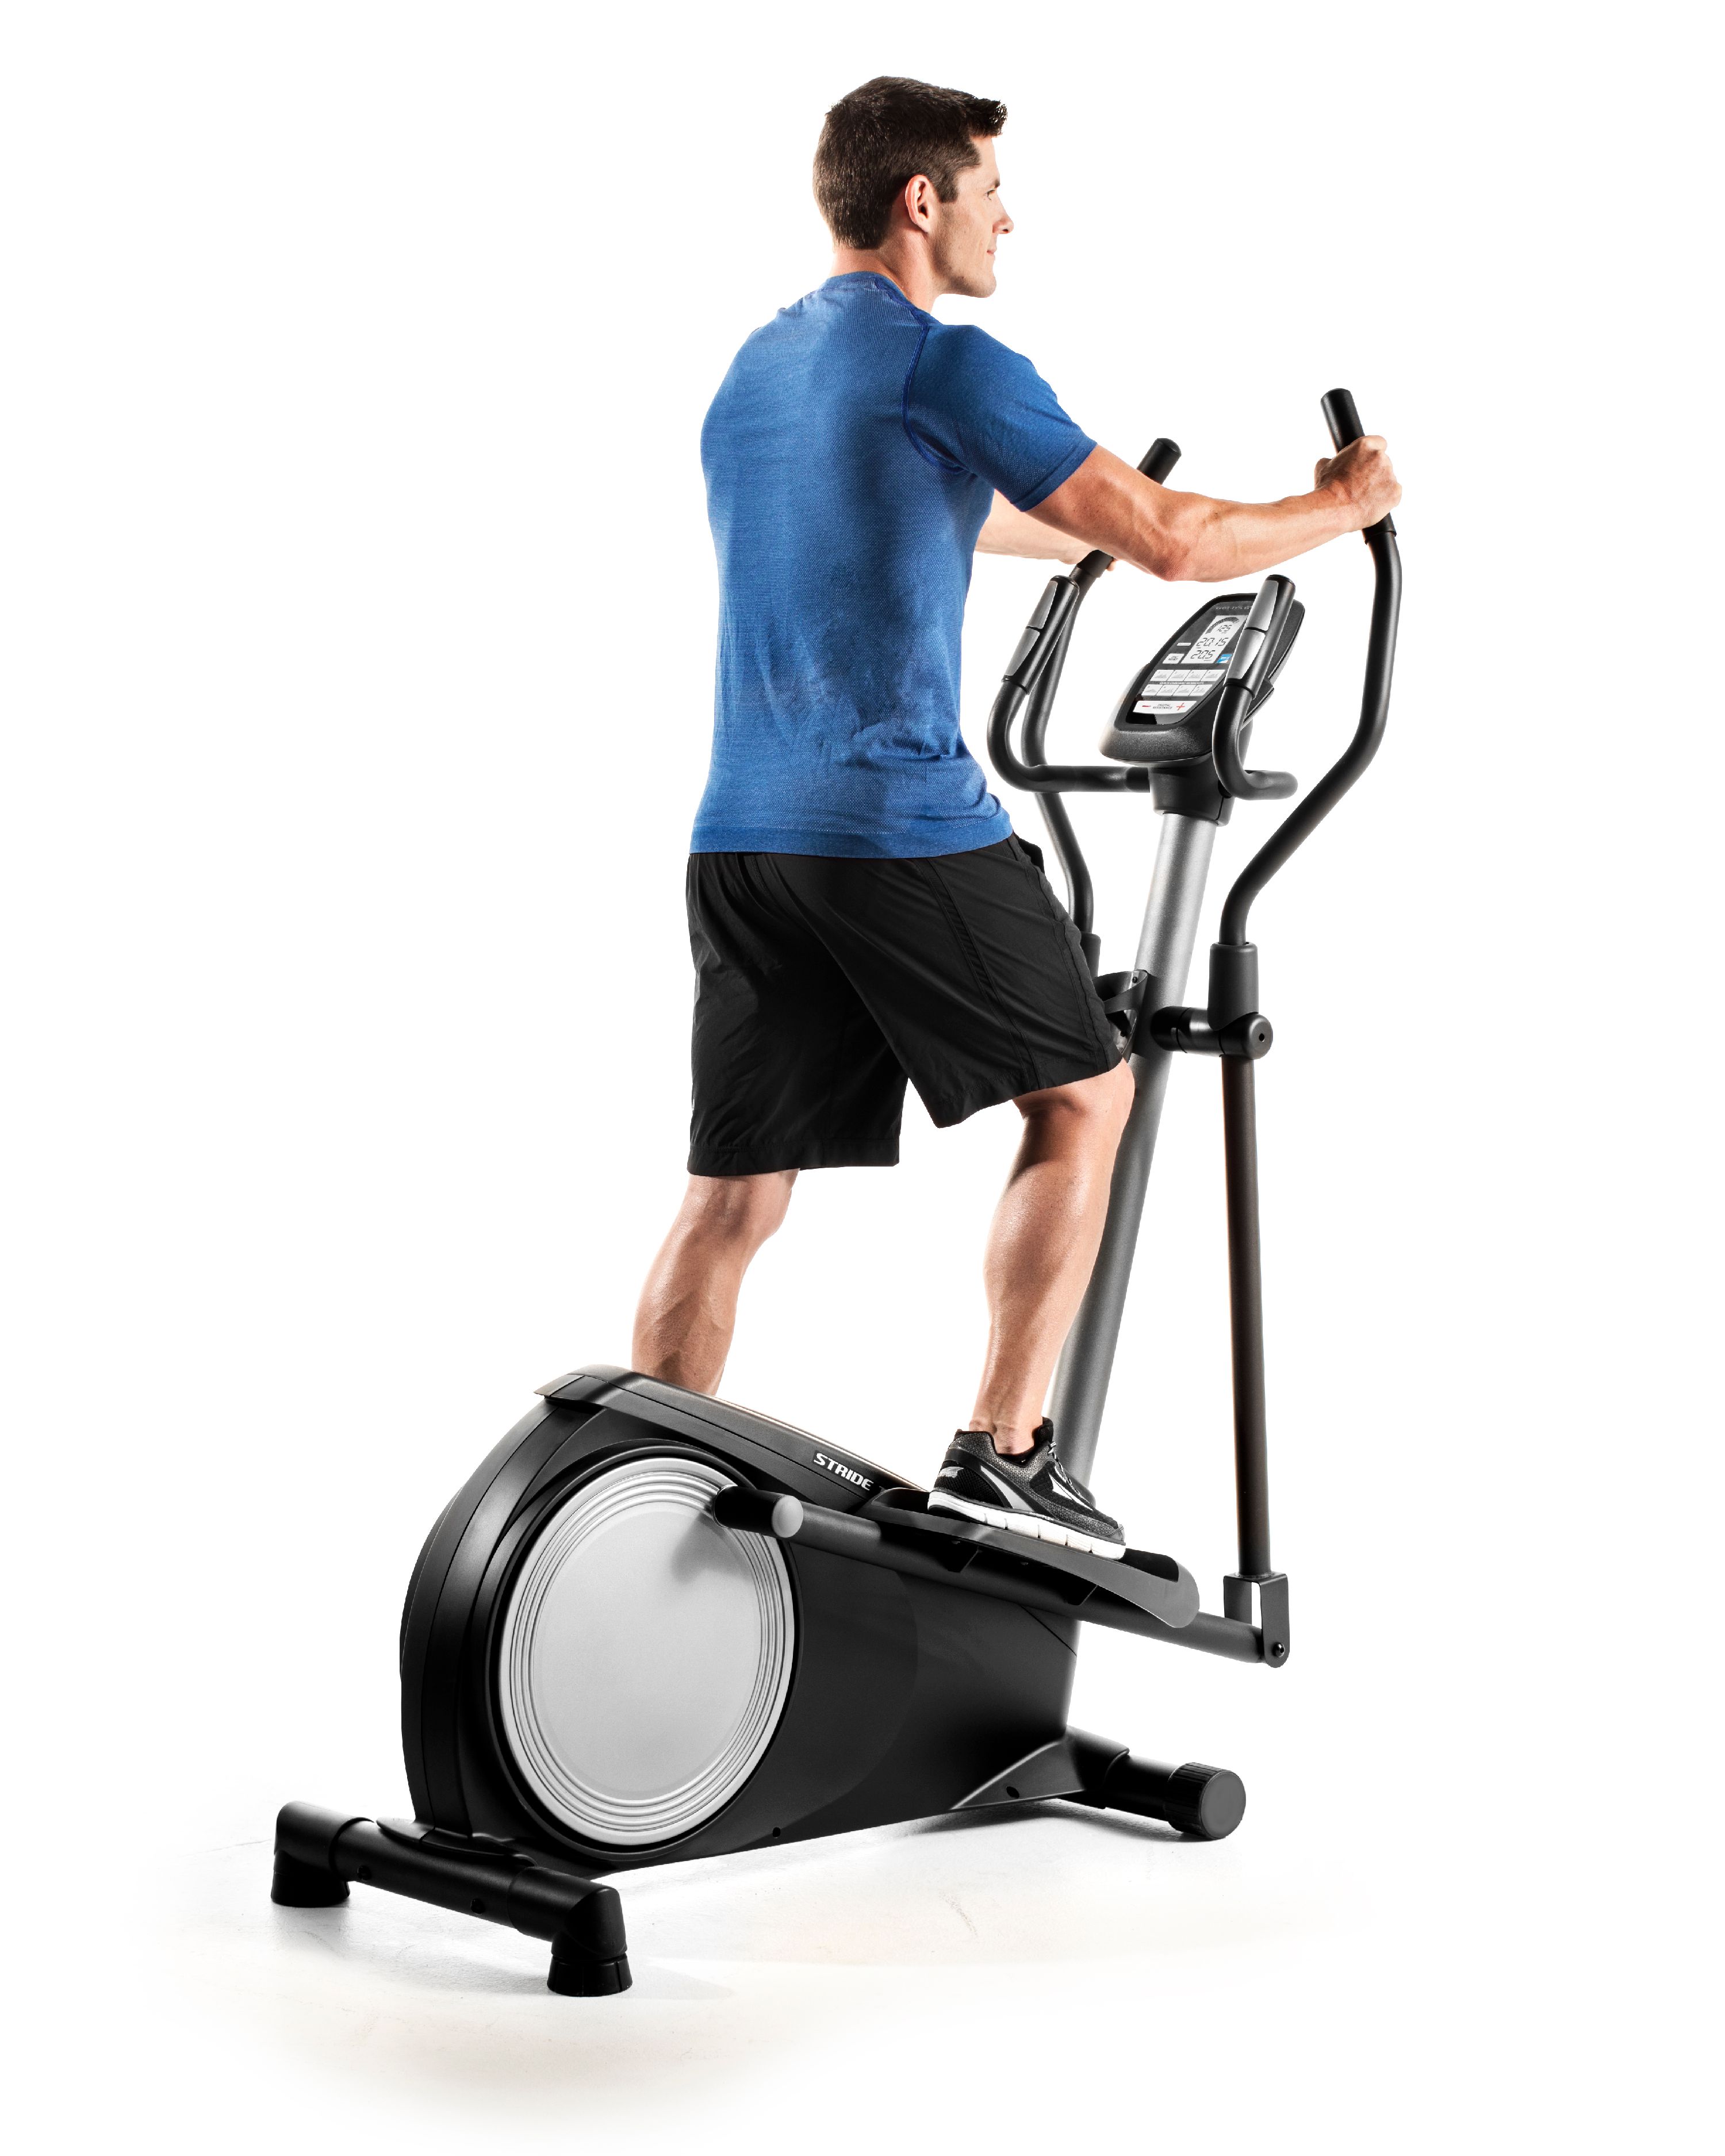 Gold's Gym Stride Trainer 380 Elliptical, iFit Coach Compatible - image 5 of 9